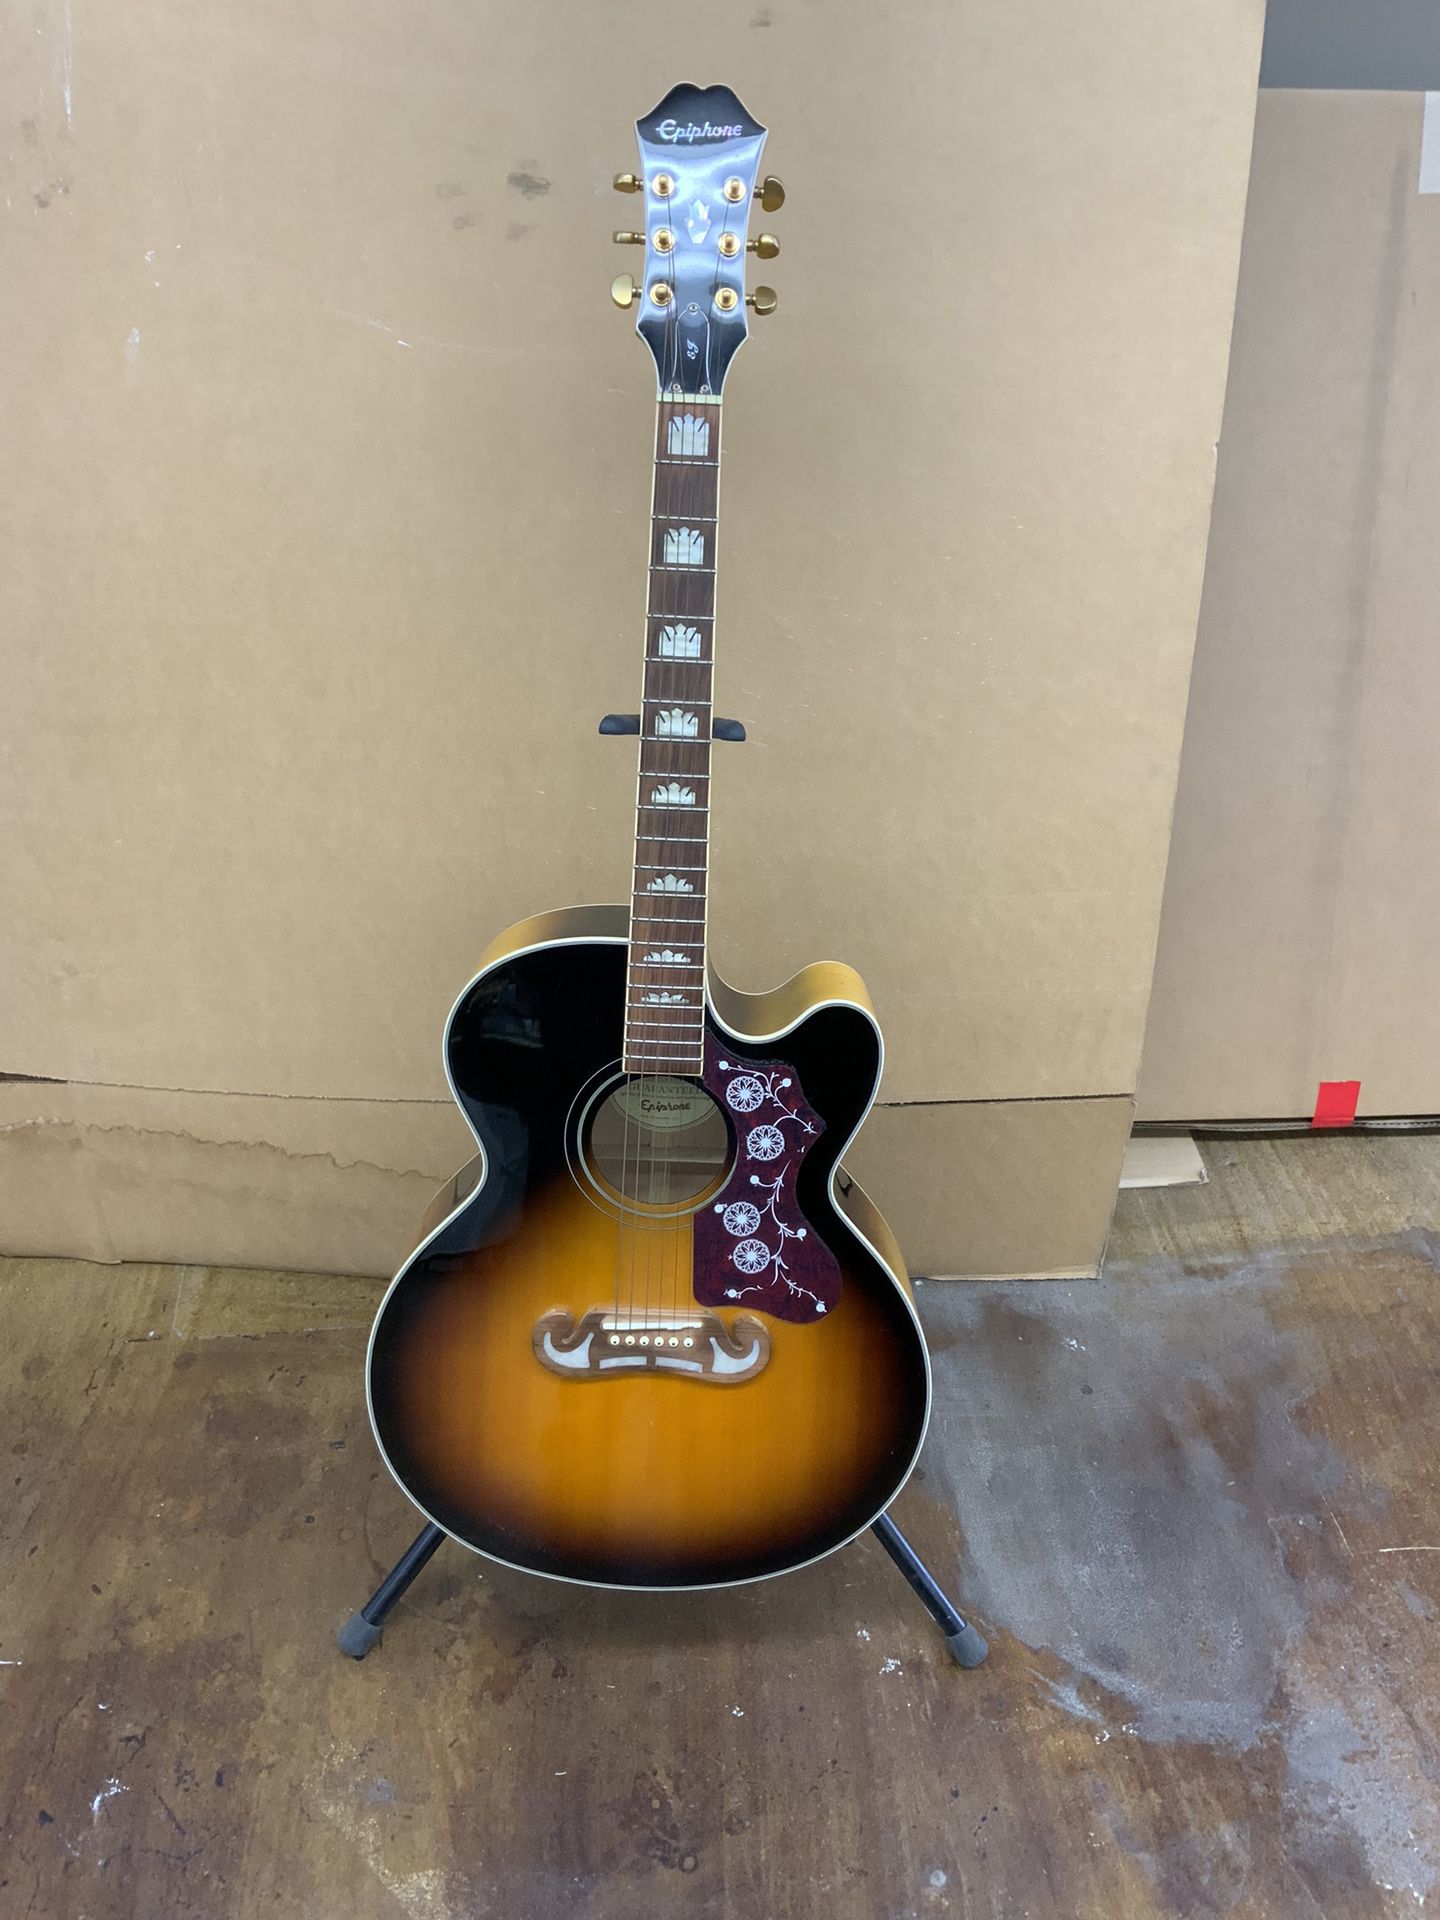 Epiphone EJ-200SCE/VS Electric Acoustic Guitar In Good Condition for ...